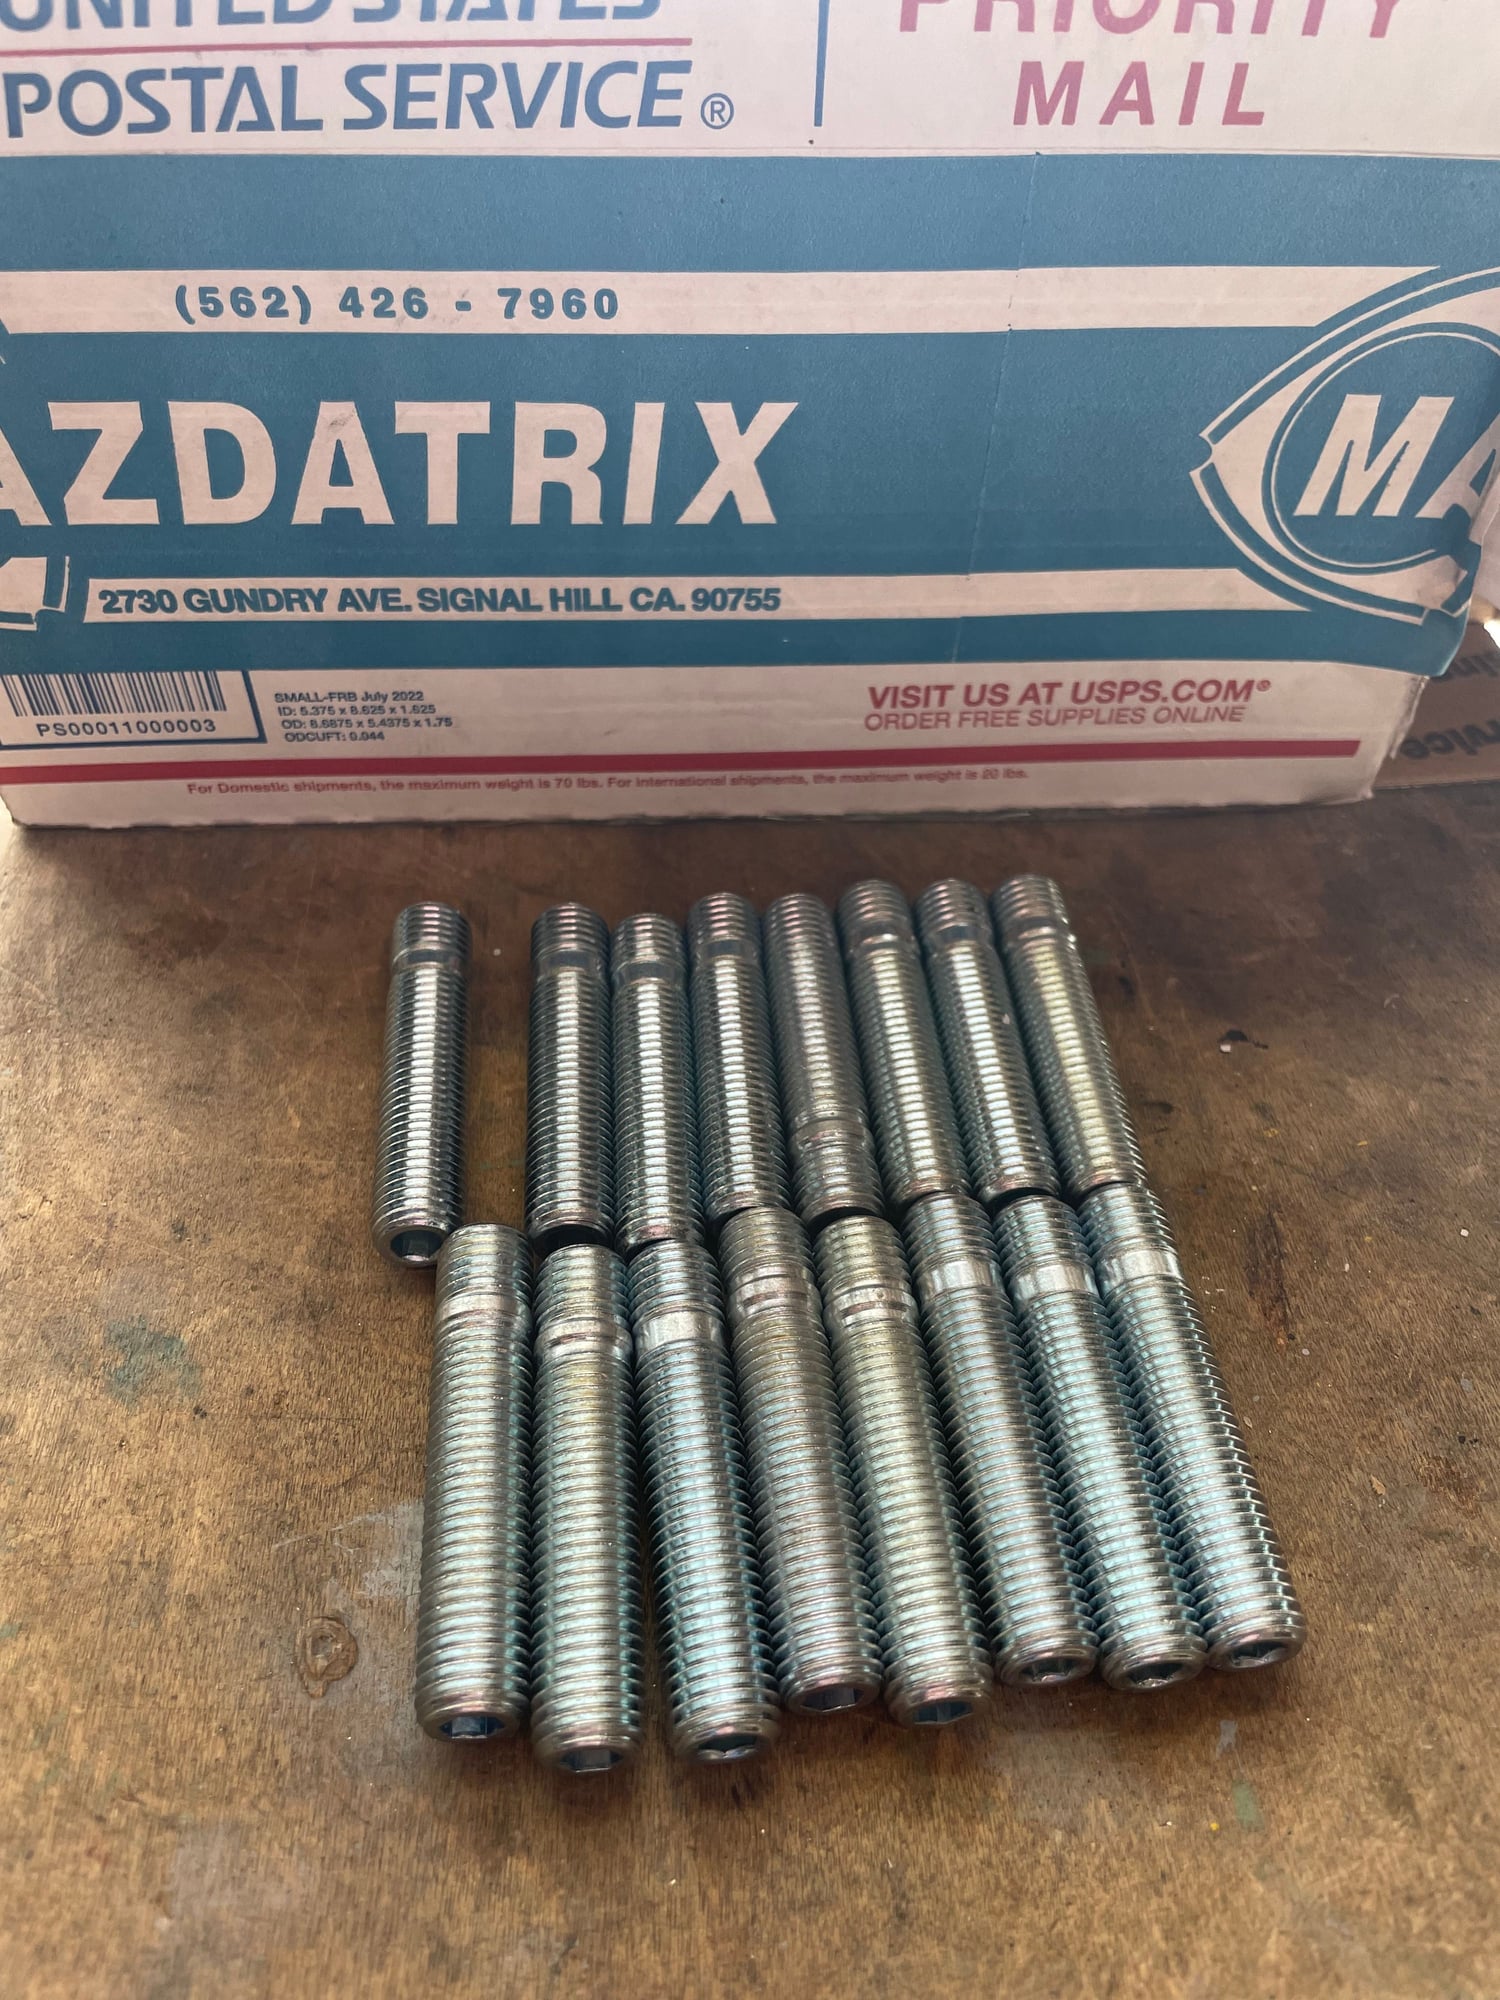 Wheels and Tires/Axles - First Gen Wheel Studs - New - 1979 to 1985 Mazda RX-7 - Mill Valley, CA 94941, United States